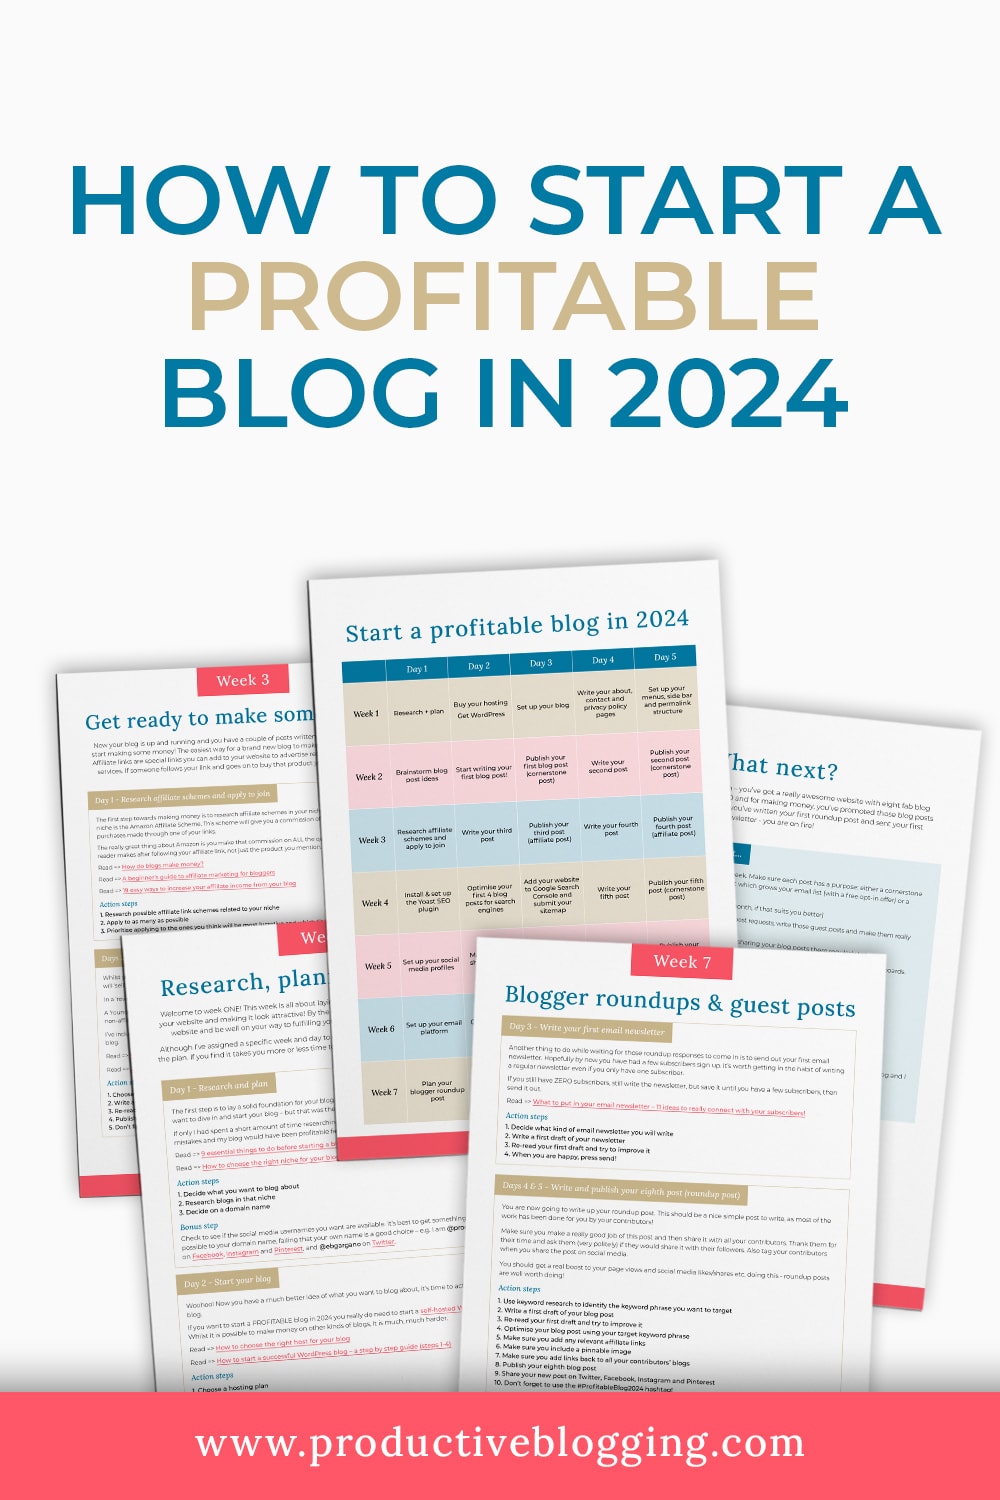 Want to start a profitable blog in 2024 but don’t know where to start? Or maybe you already have a blog, but you still haven’t made any money yet? In this post I show you the steps you need to take to go from zero to a profitable blog in 2024! #startablog #startablog2024 #profitableblog #makemoneyblogging #newblogger #bloggingnewbie #selfhosted #wordpressblog #siteground #newblog2024 #newyearnewblog #newyearsresolutions #blogplan #blogplanner #bloggingtips #productiveblogging #profitableblog2024